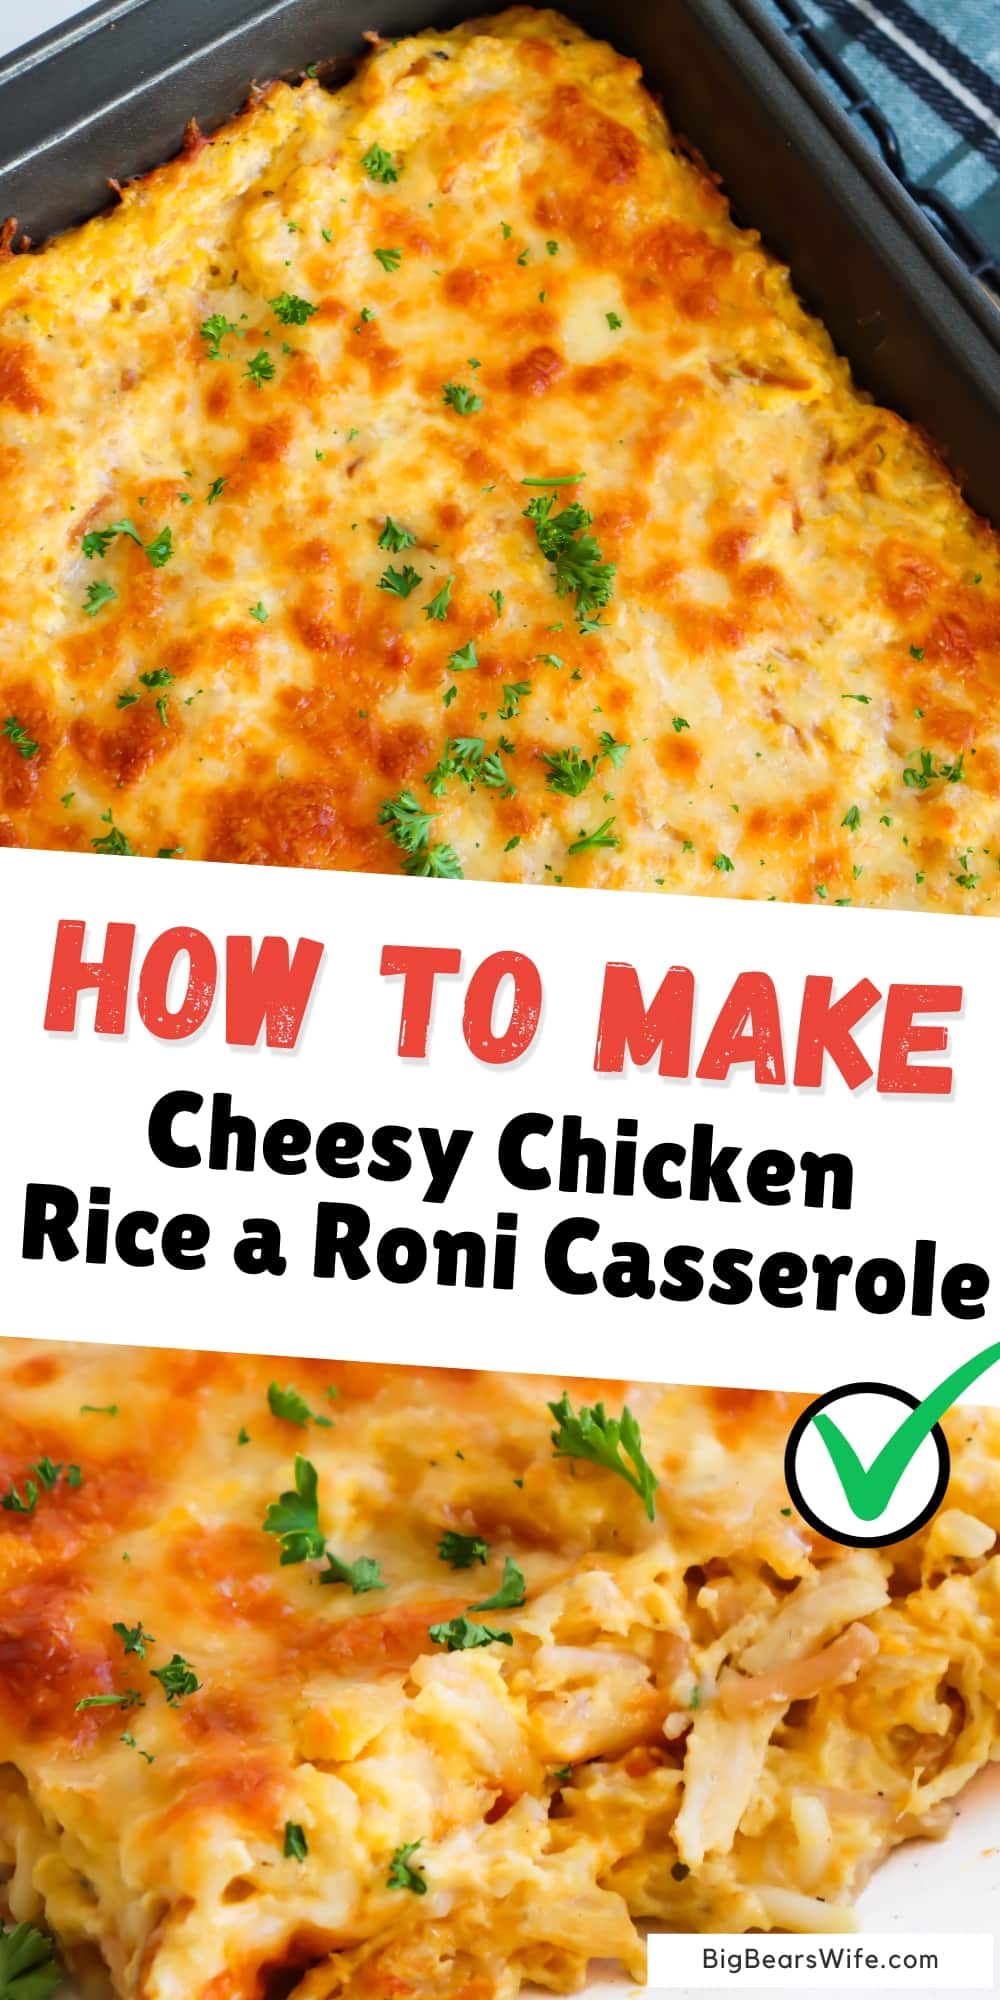 Indulge in the ultimate comfort food with this Cheesy Chicken Rice a Roni Casserole! This recipe is so easy to make and has gotten rave reviews! Prepare to cozy up with a plate of pure comfort and satisfaction! via @bigbearswife